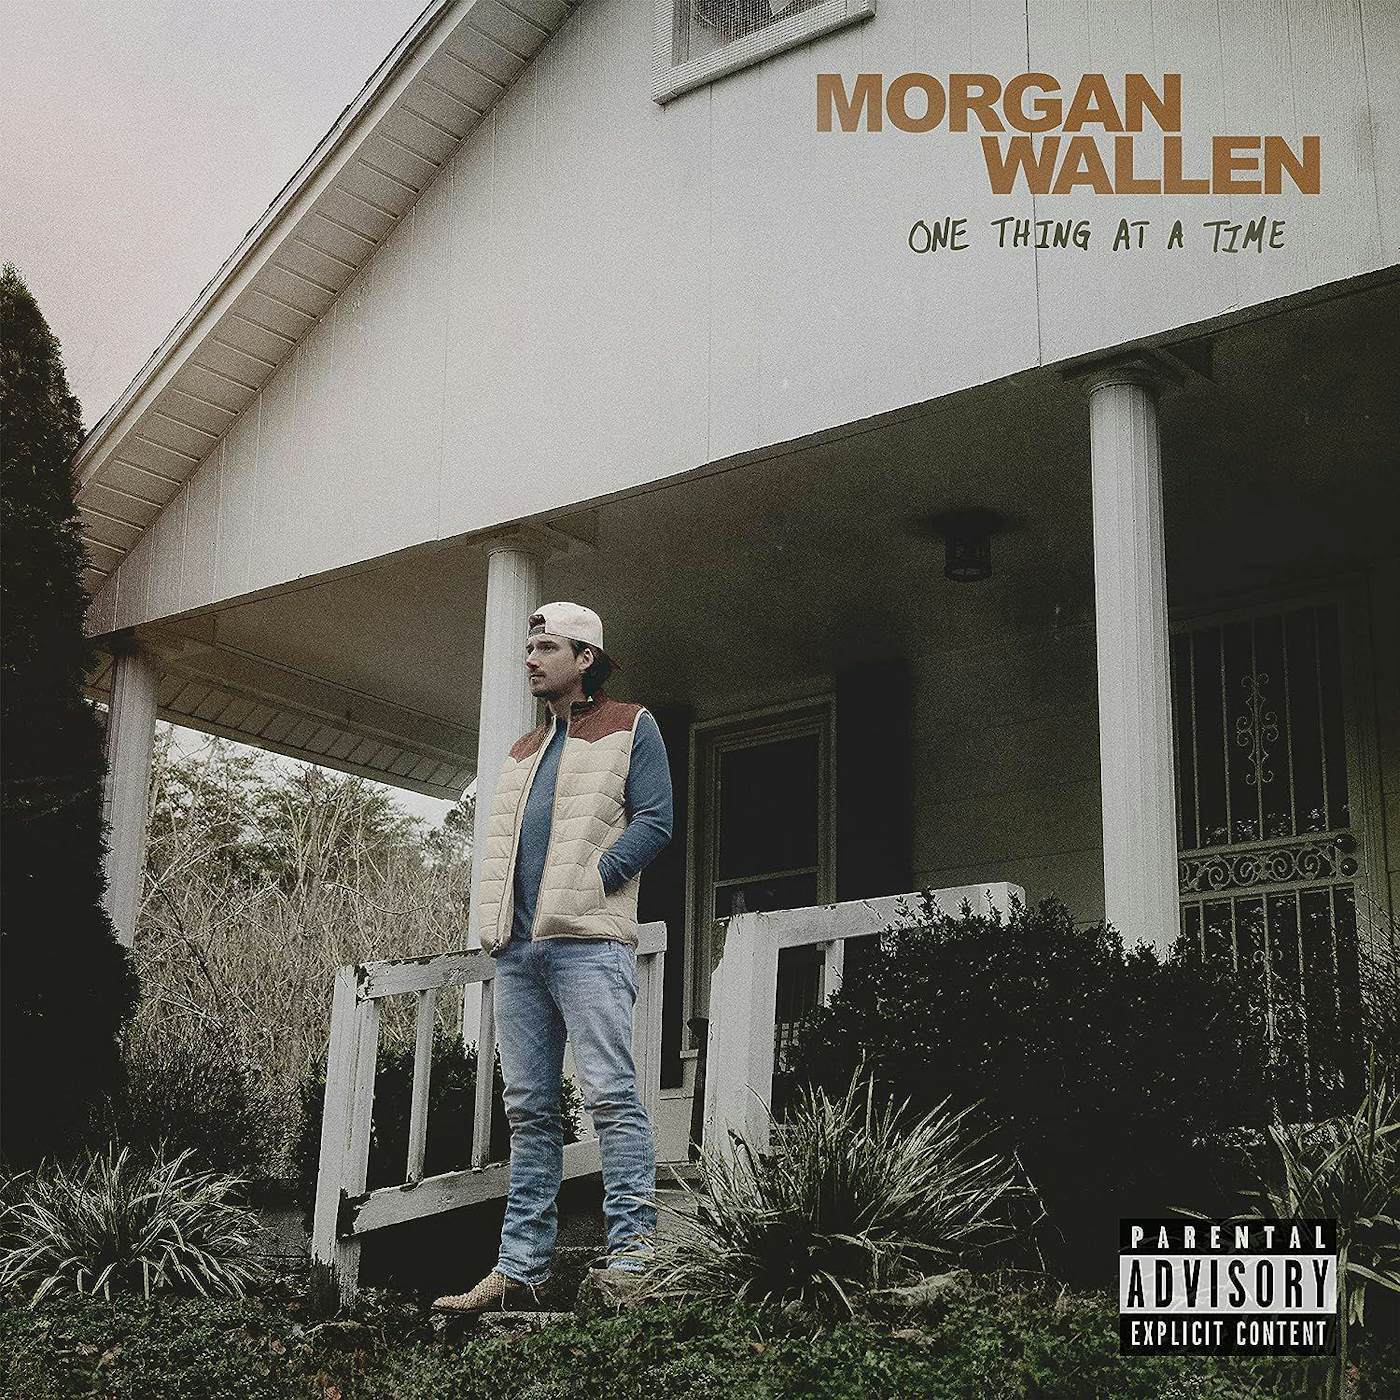 Morgan Wallen One Thing At A Time (3LP/Limited/Green) Vinyl Record